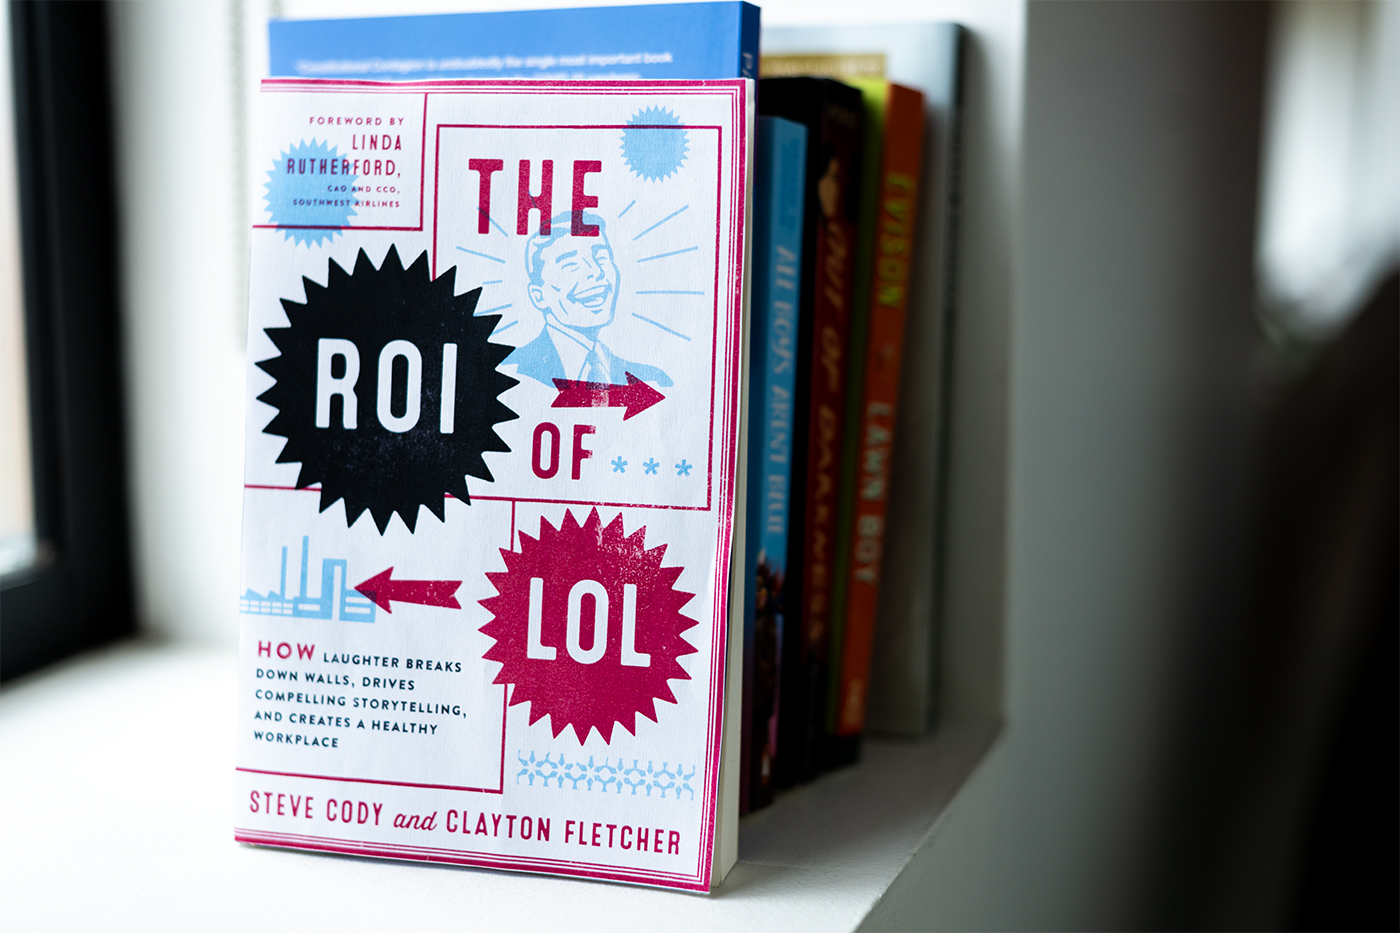 a copy of Steve Cody and Clayton Fletcher's book "The ROI of LOL" 